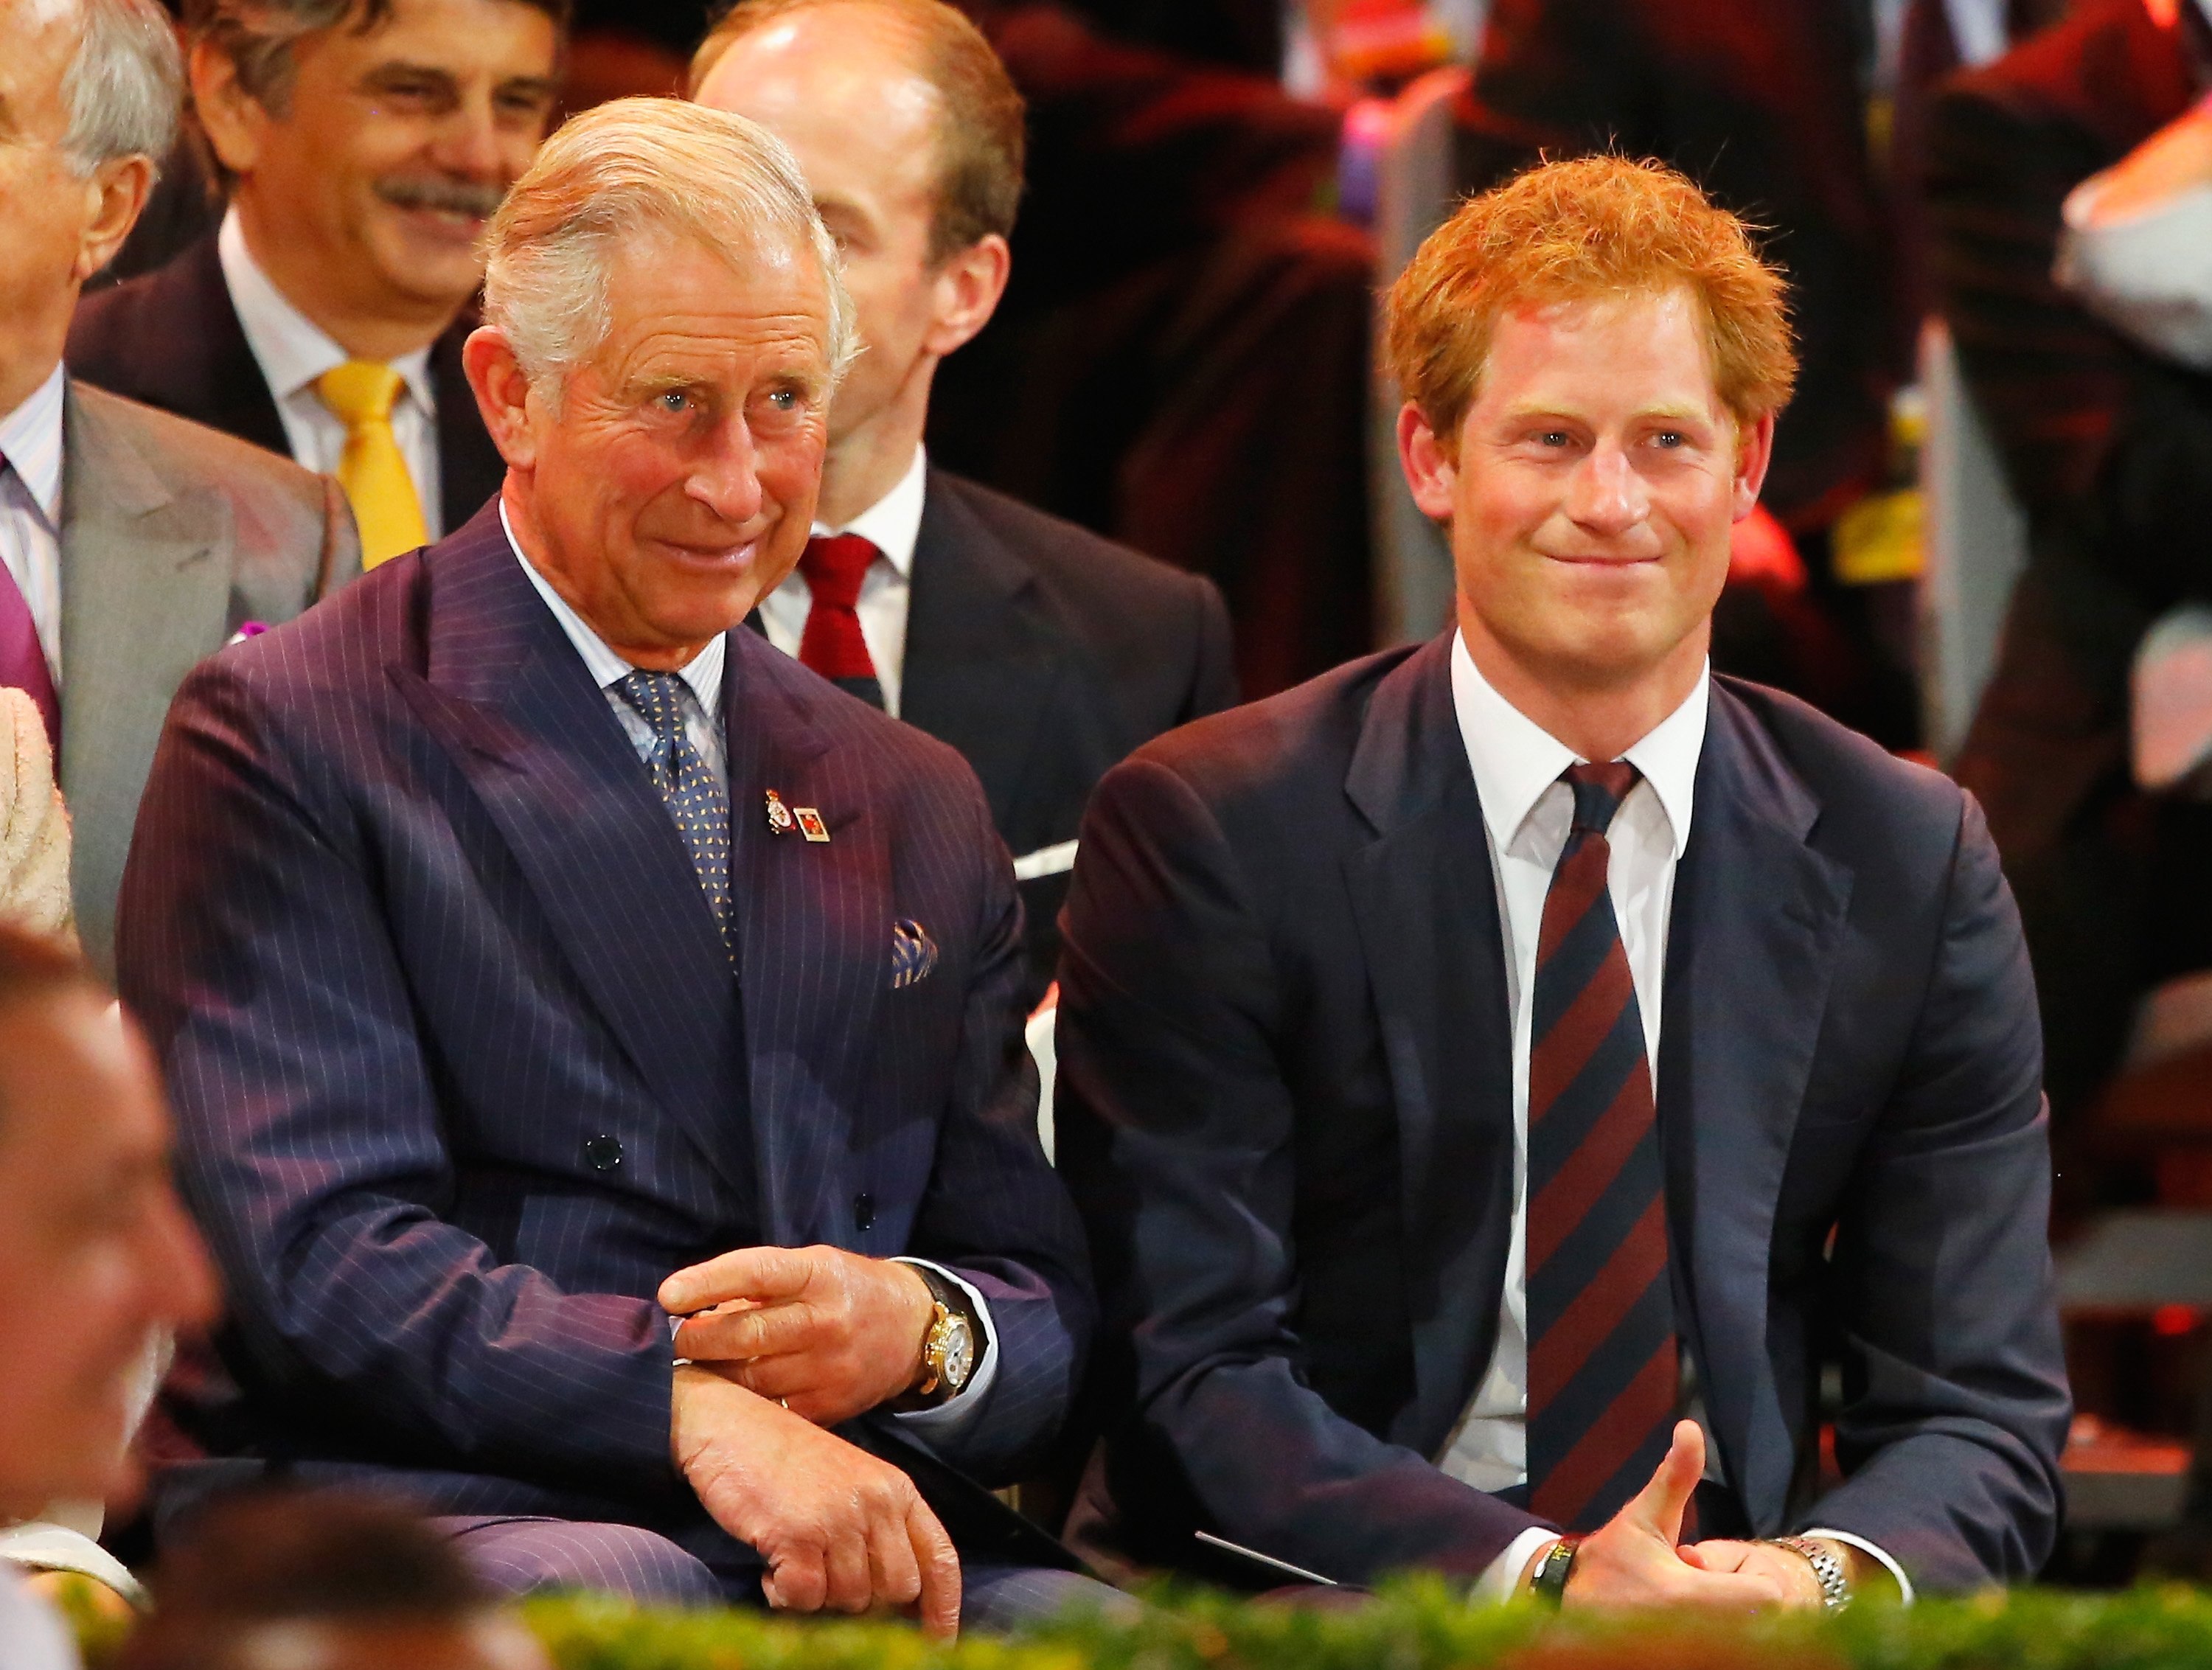 King Charles III and Prince Harry attend the opening ceremony for the Invictus Games, presented by Jaguar Land Rover at Queen Elizabeth Olympic Park on September 10, 2014, in London, England. | Source: Getty Images